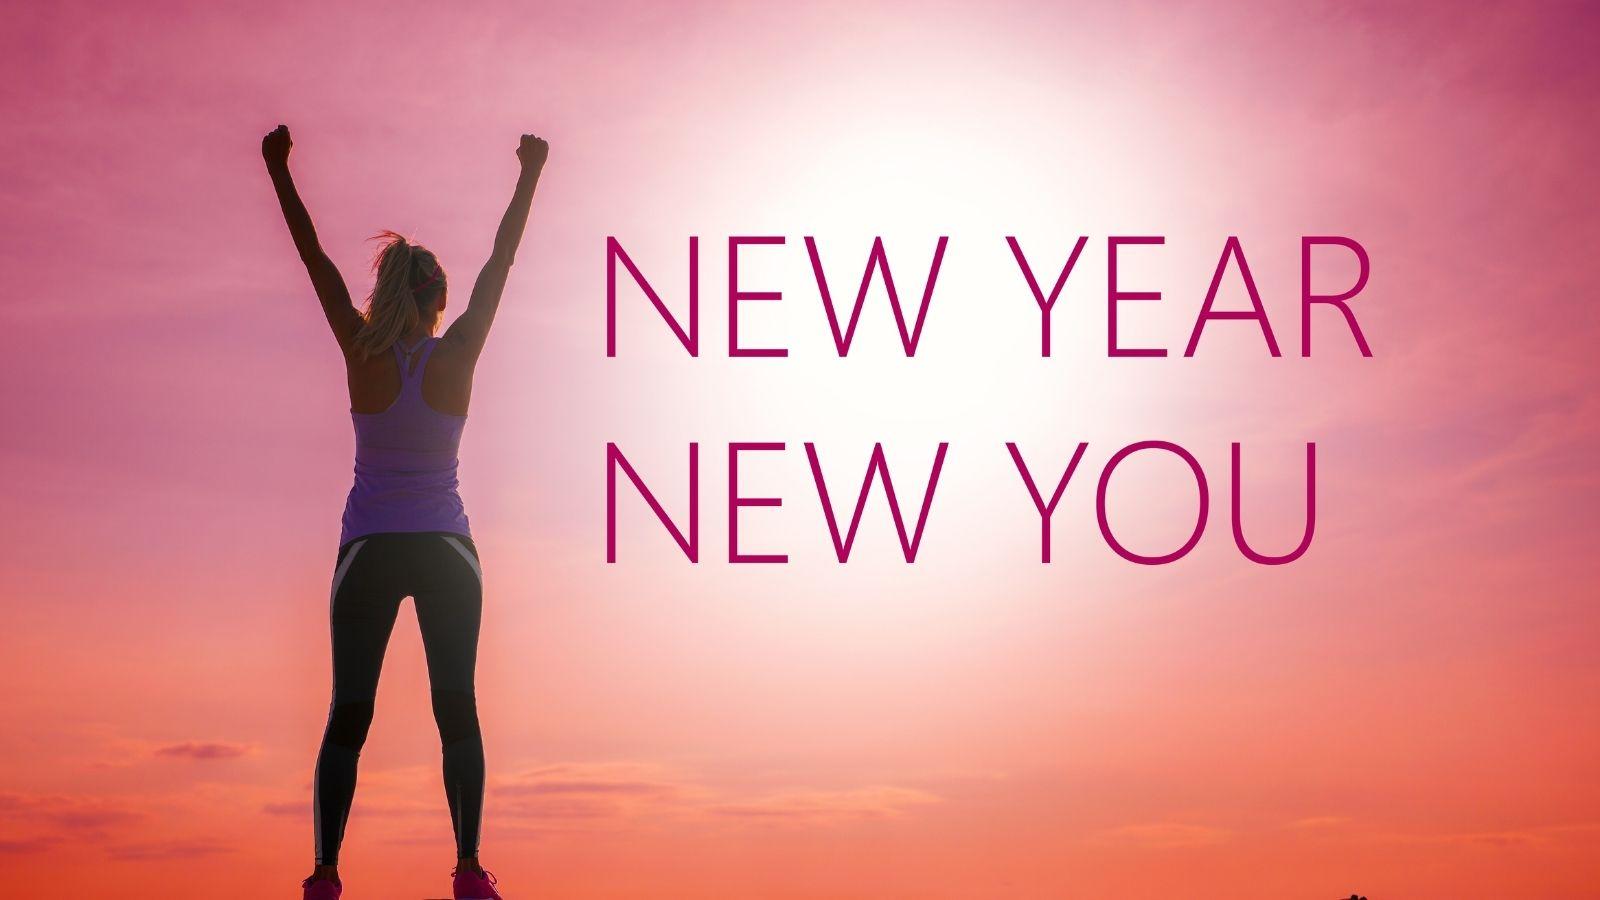 Image of a woman with raised hands looking happy on a pink background with the inscription new year new you to her right